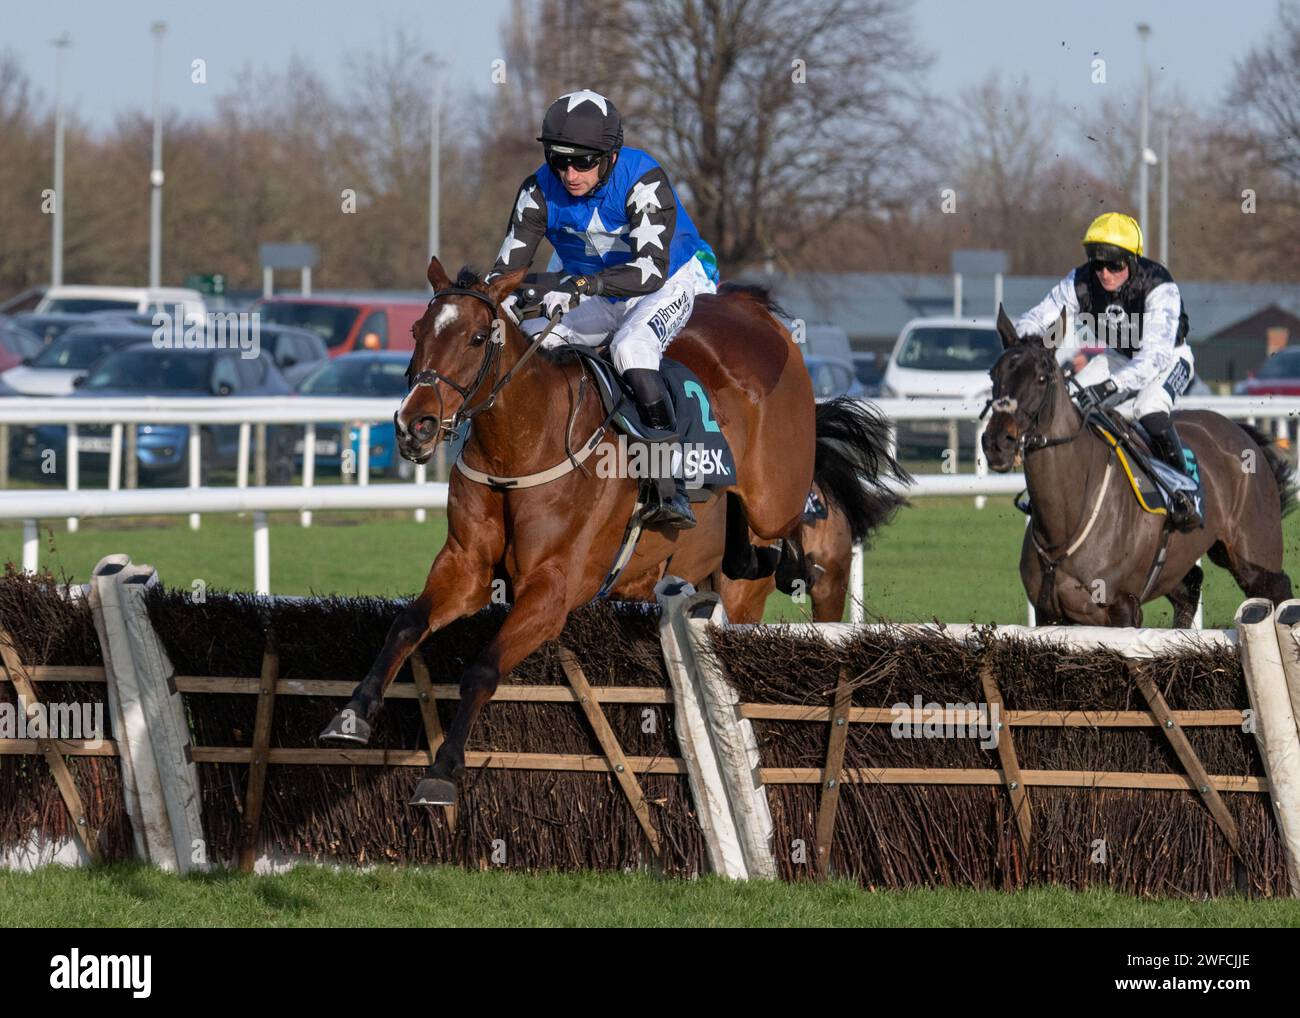 Ashroe Diamond wins the SBK Yorkshire Rose Mares' Hurdle at Doncaster for W P Mullins and P W Mullins for Blue Blood Racing Club - Sat 27 Jan 24 Stock Photo